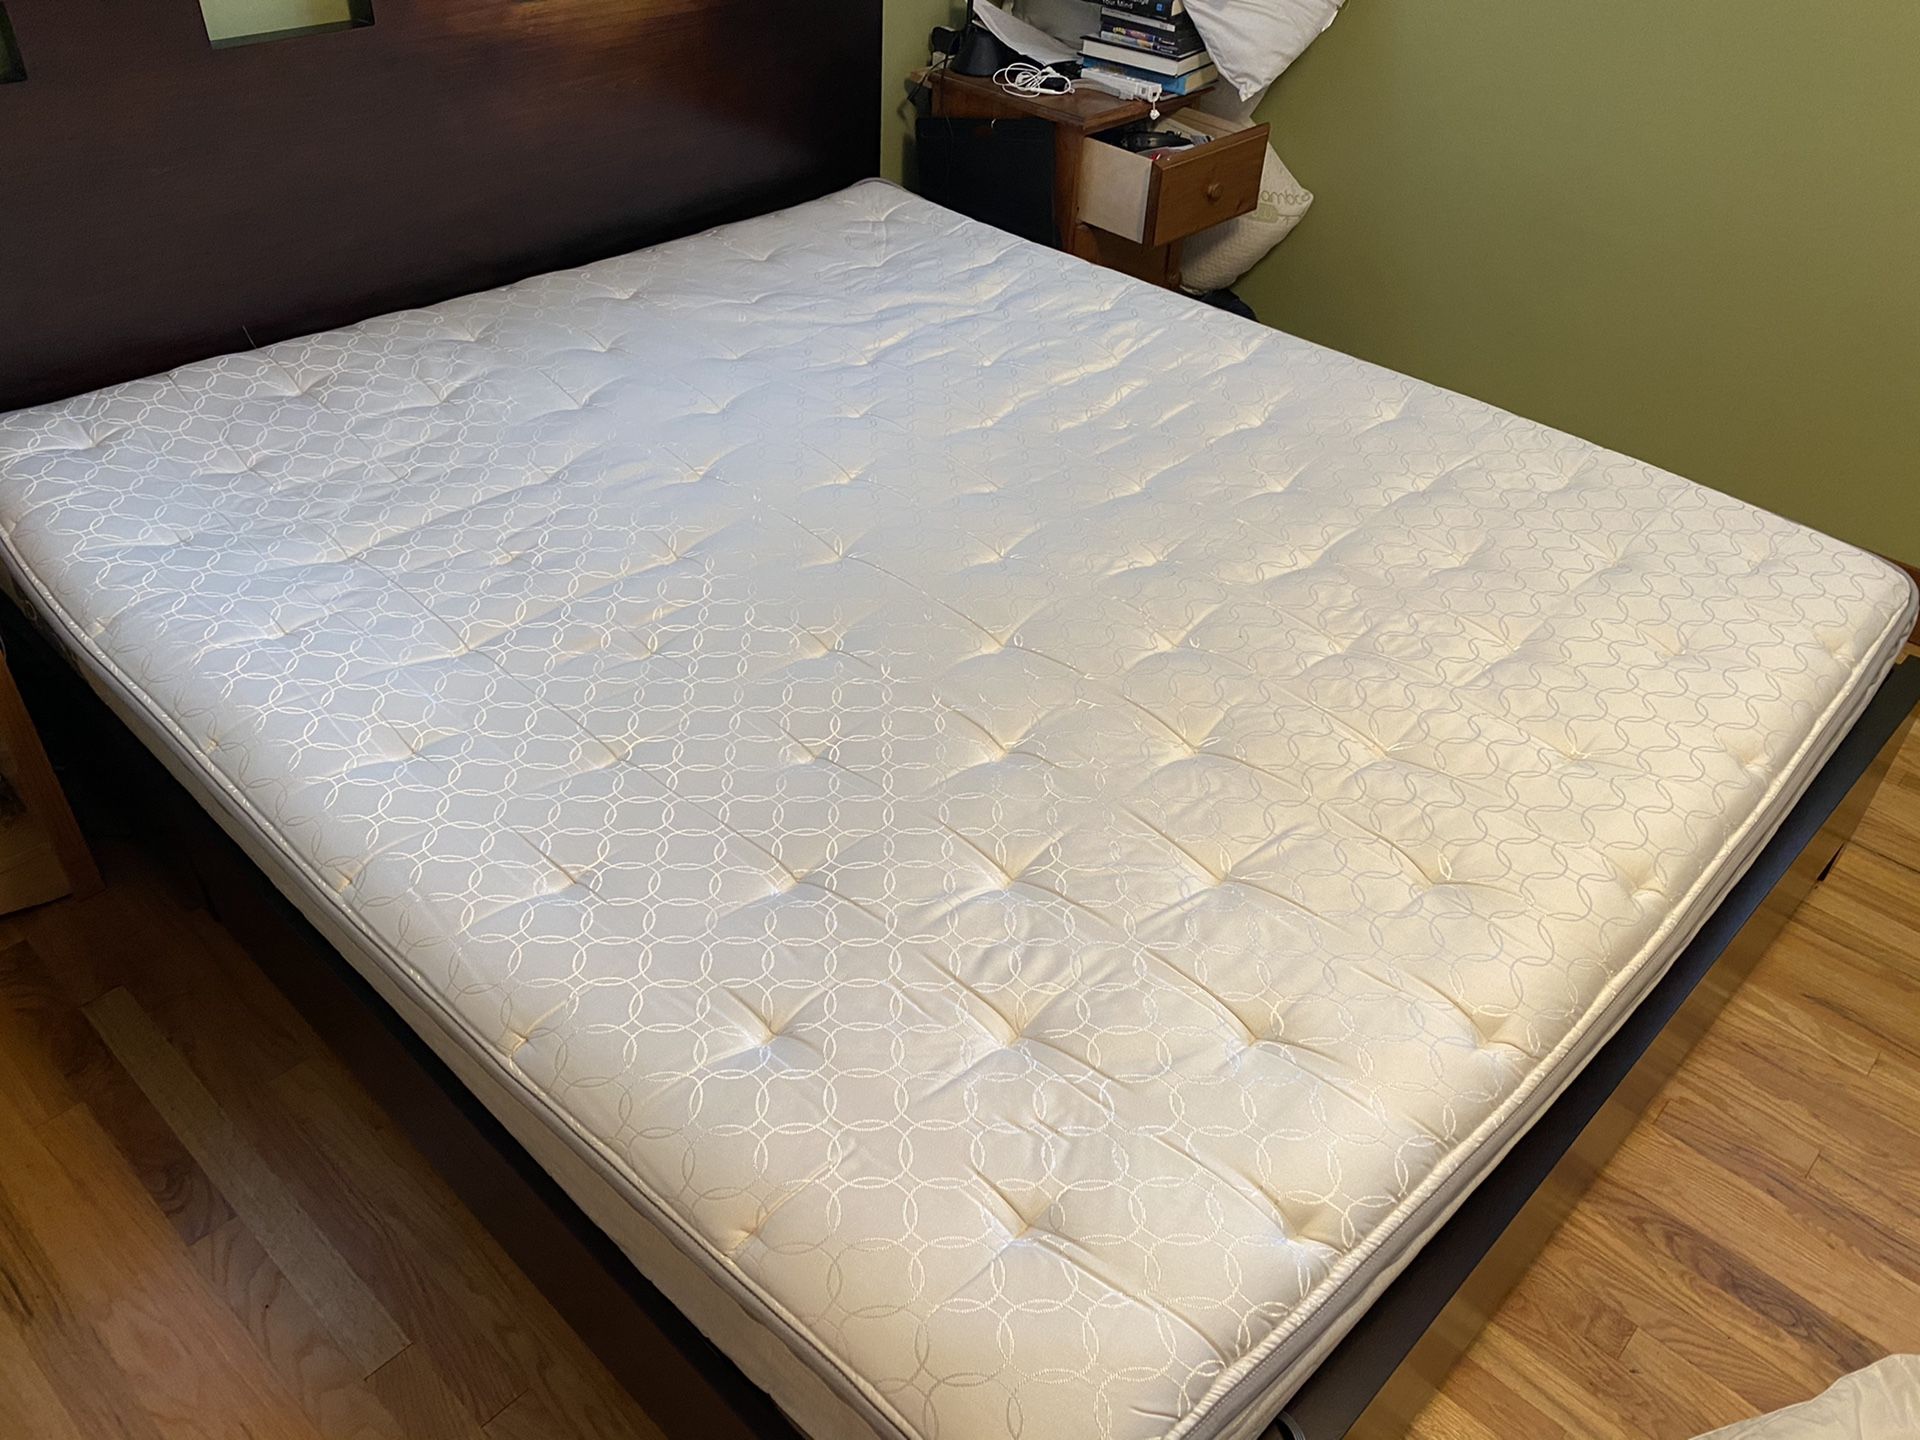 Sleep Number California King Mattress and accessories